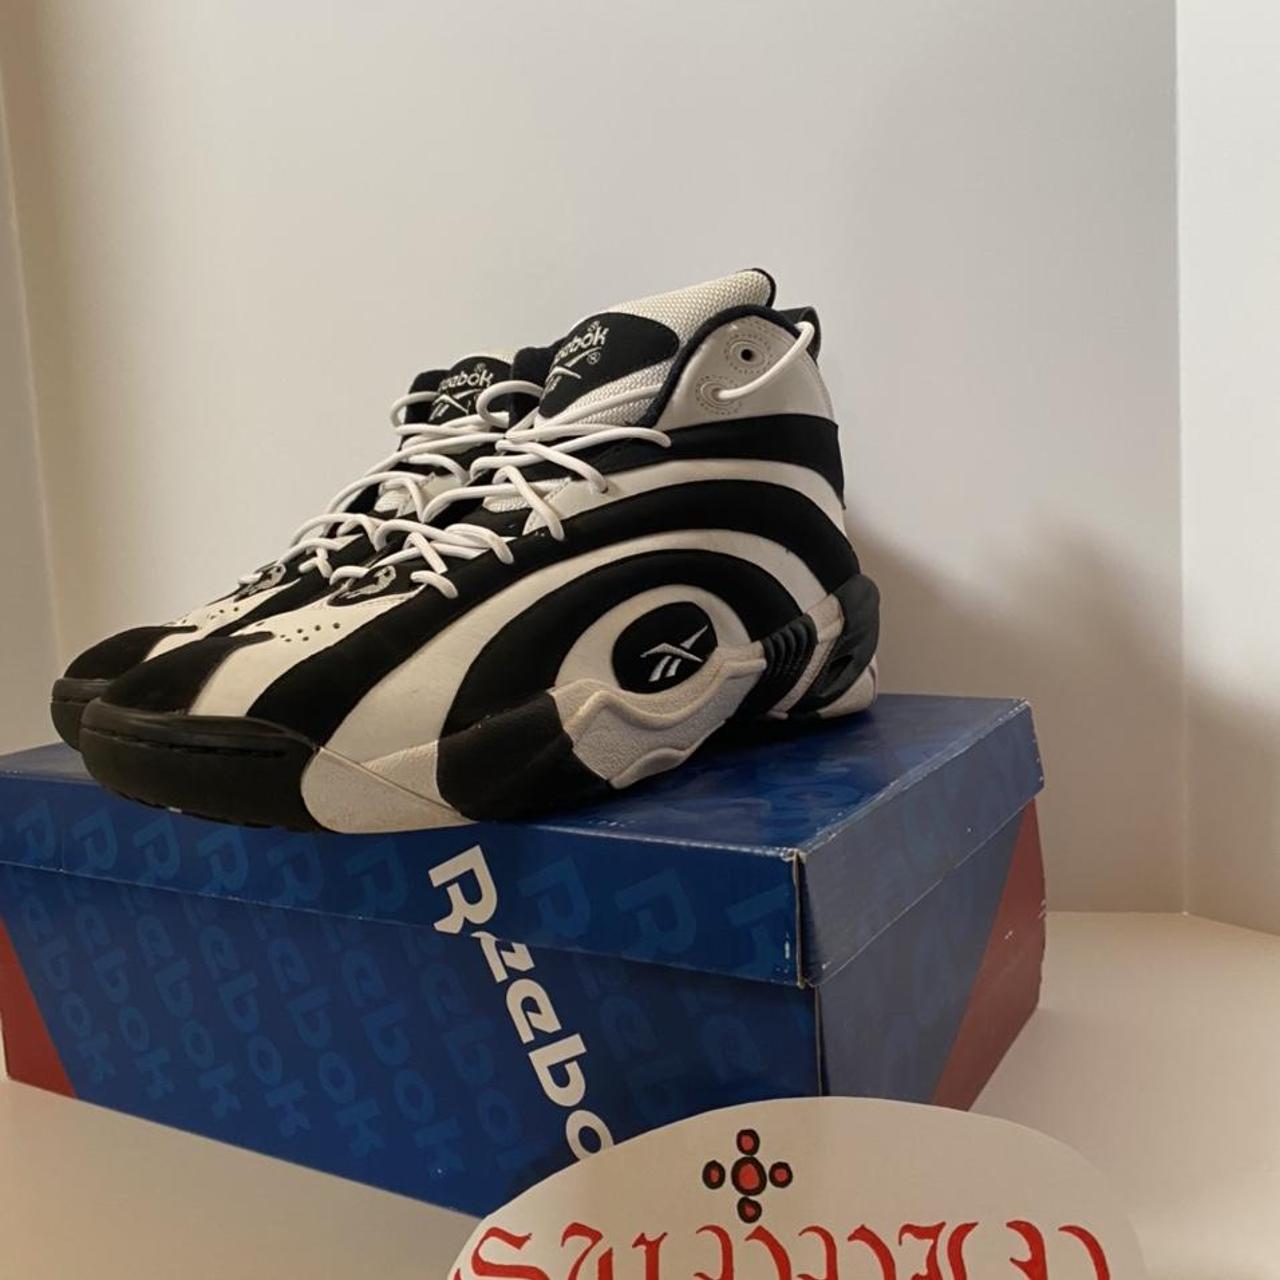 Shaqnosis 2013 re-issue OG Colorway Worn but not... - Depop